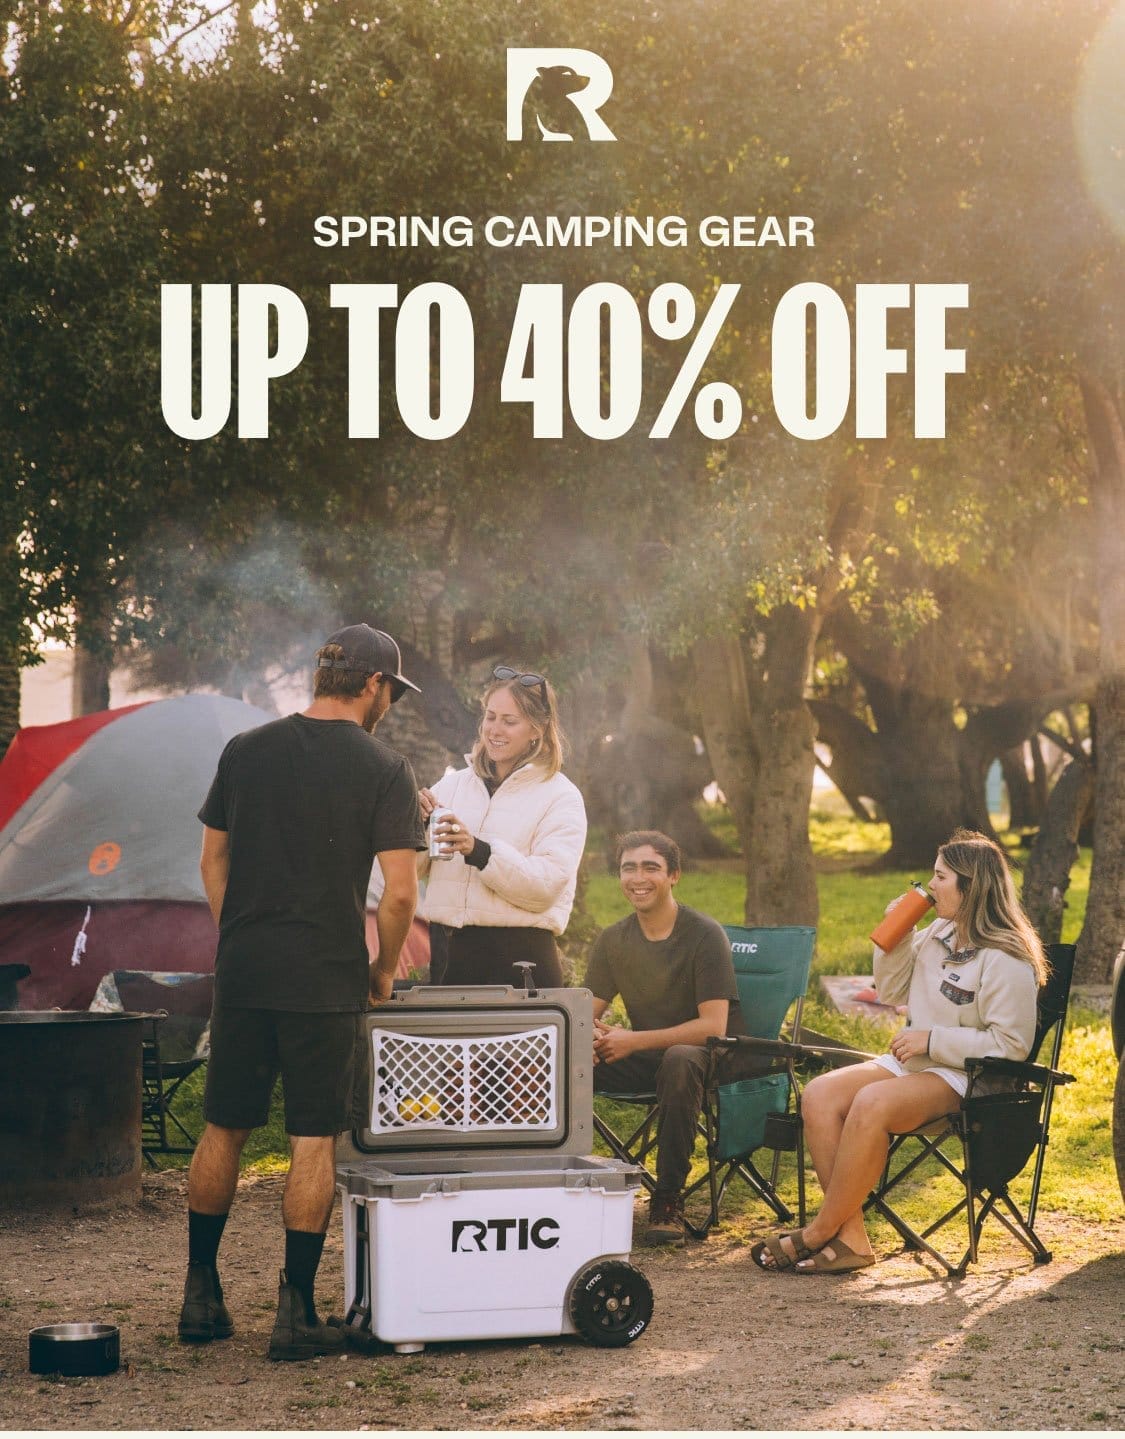 Spring Camping Gear - up to 40% off